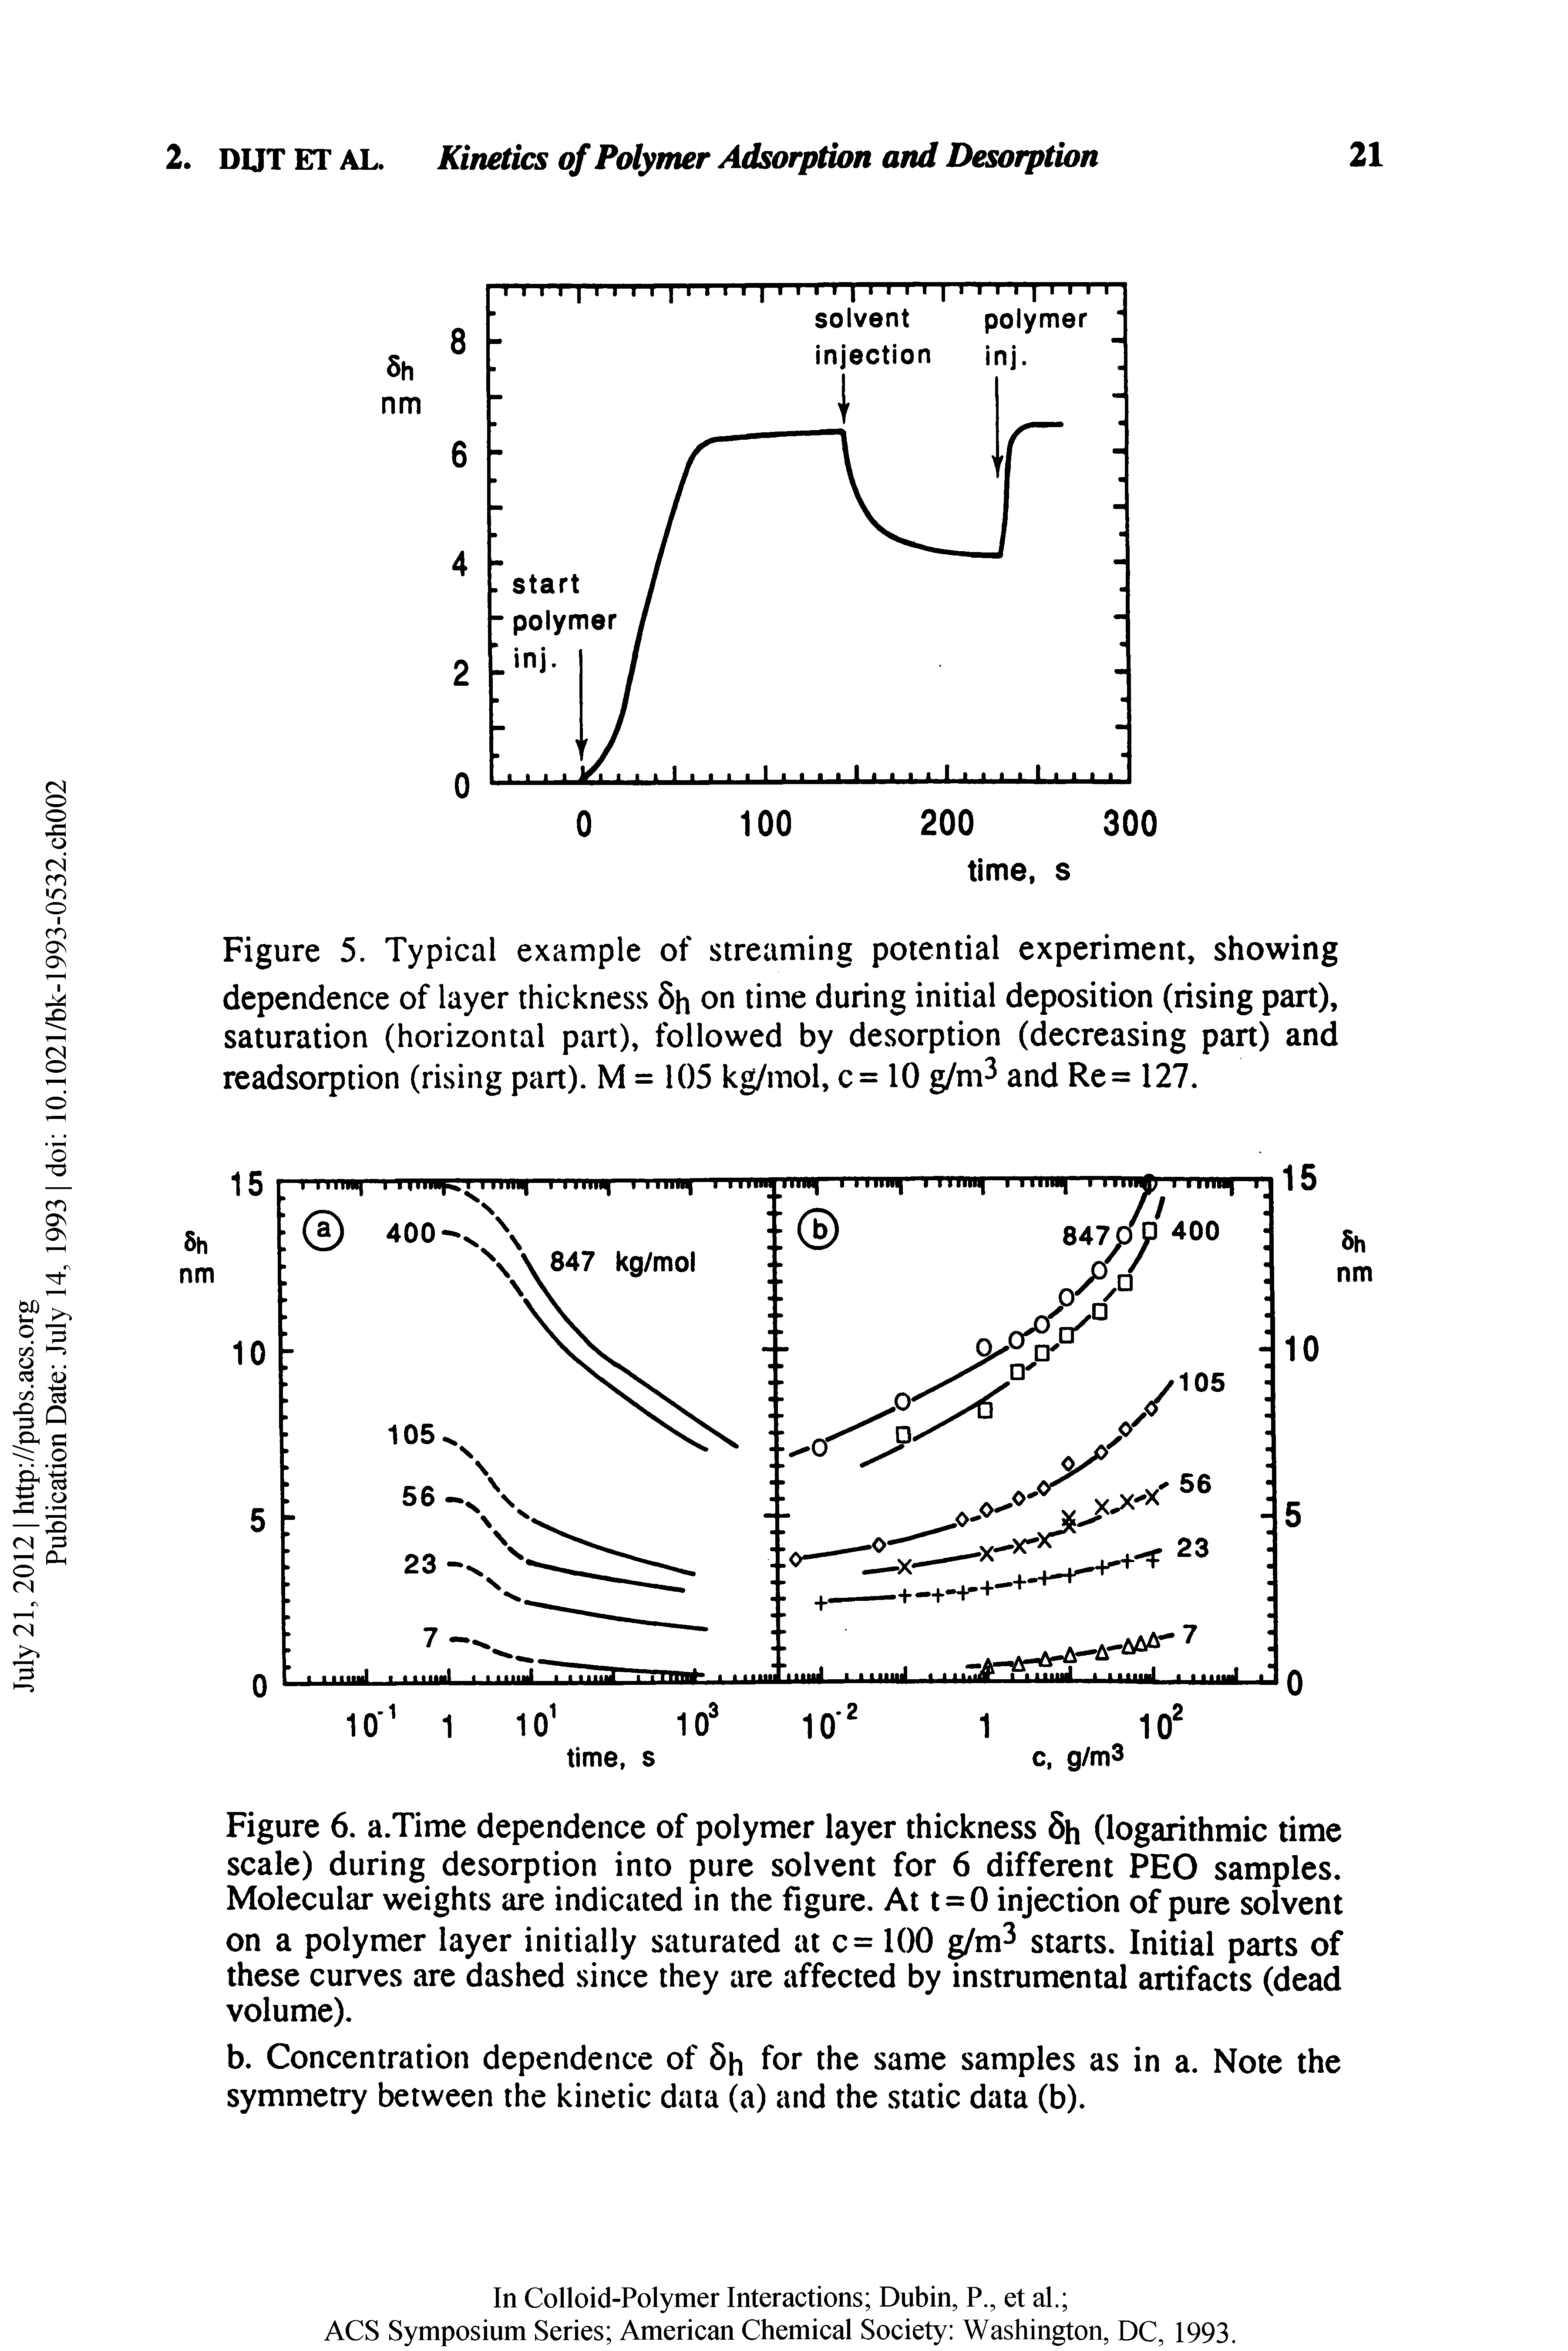 Figure 5. Typical example of streaming potential experiment, showing dependence of layer thickness 5h on time during initial deposition (rising part), saturation (horizontal part), followed by desorption (decreasing part) and readsorption (rising part). M = 105 kg/mol, c= 10 g/m and Re= 127.